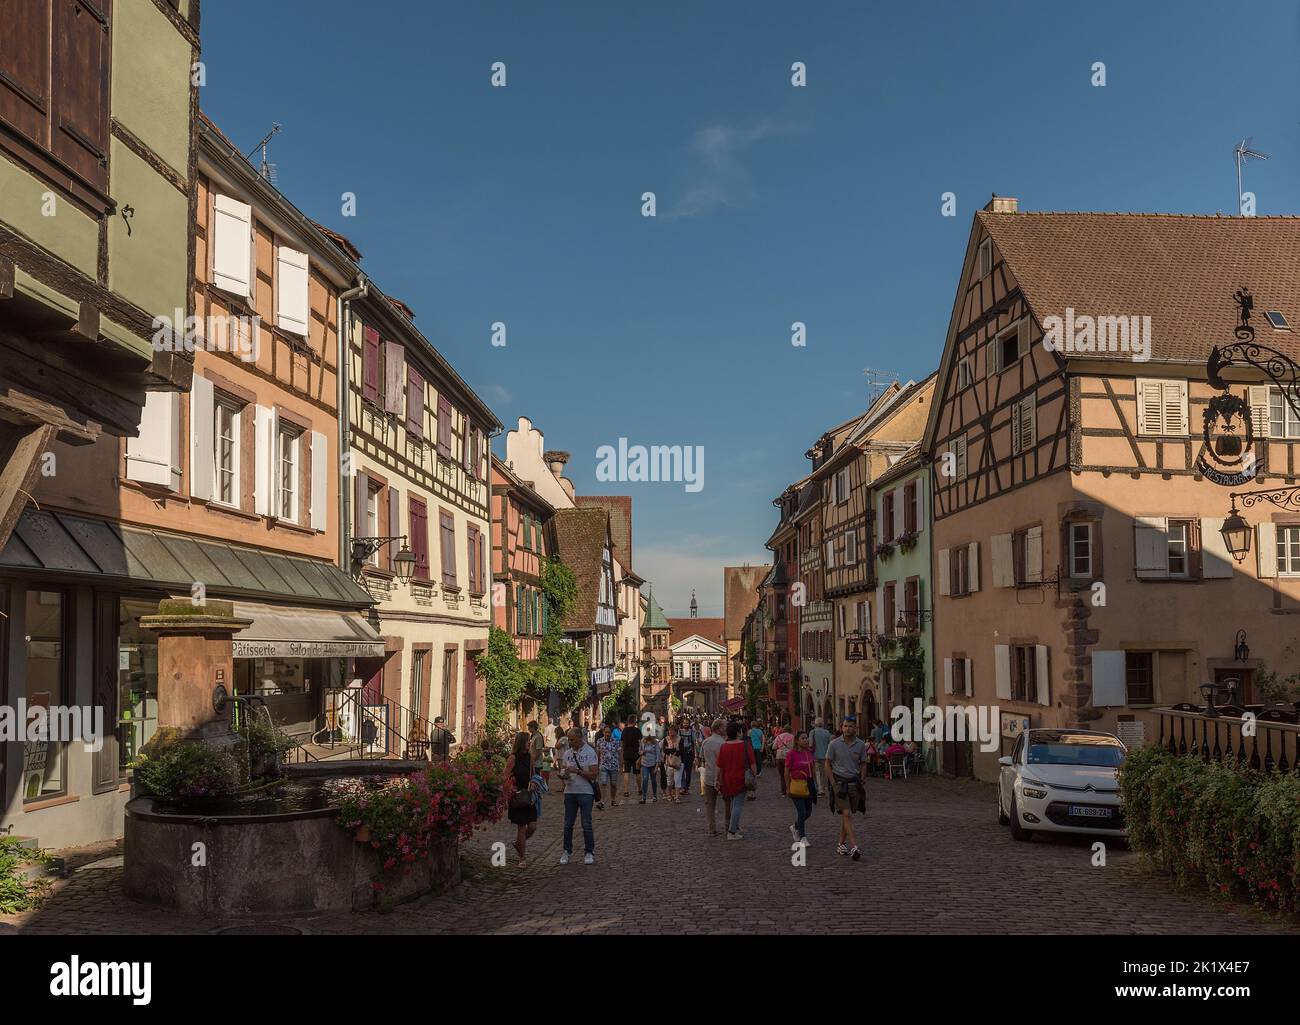 People on street in medieval village of Riquewihr, Alsace, France Stock Photo